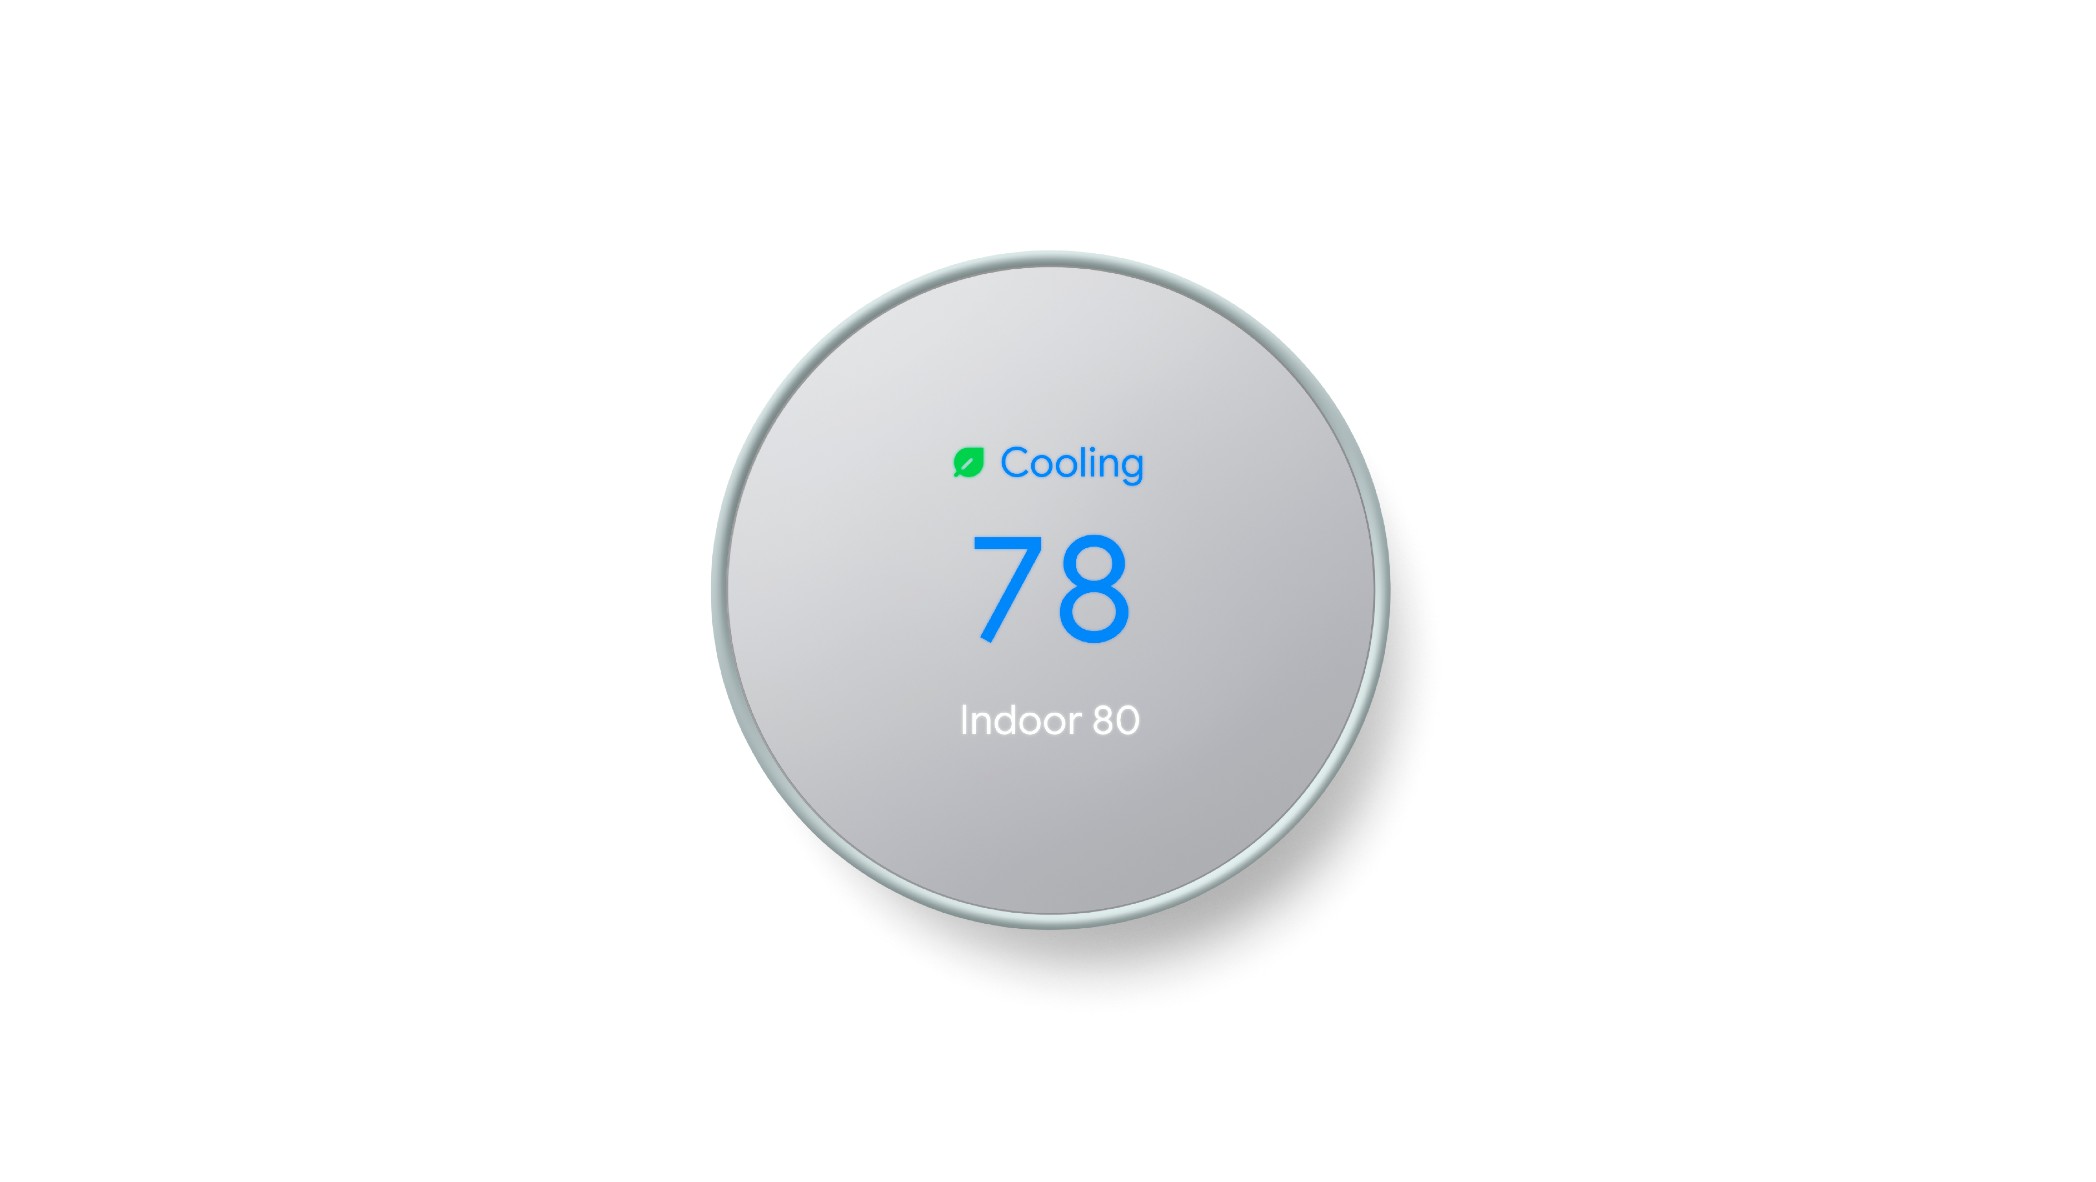 Image showing a Nest Thermostat turned to 78 degrees with the eco-savings green leaf icon.